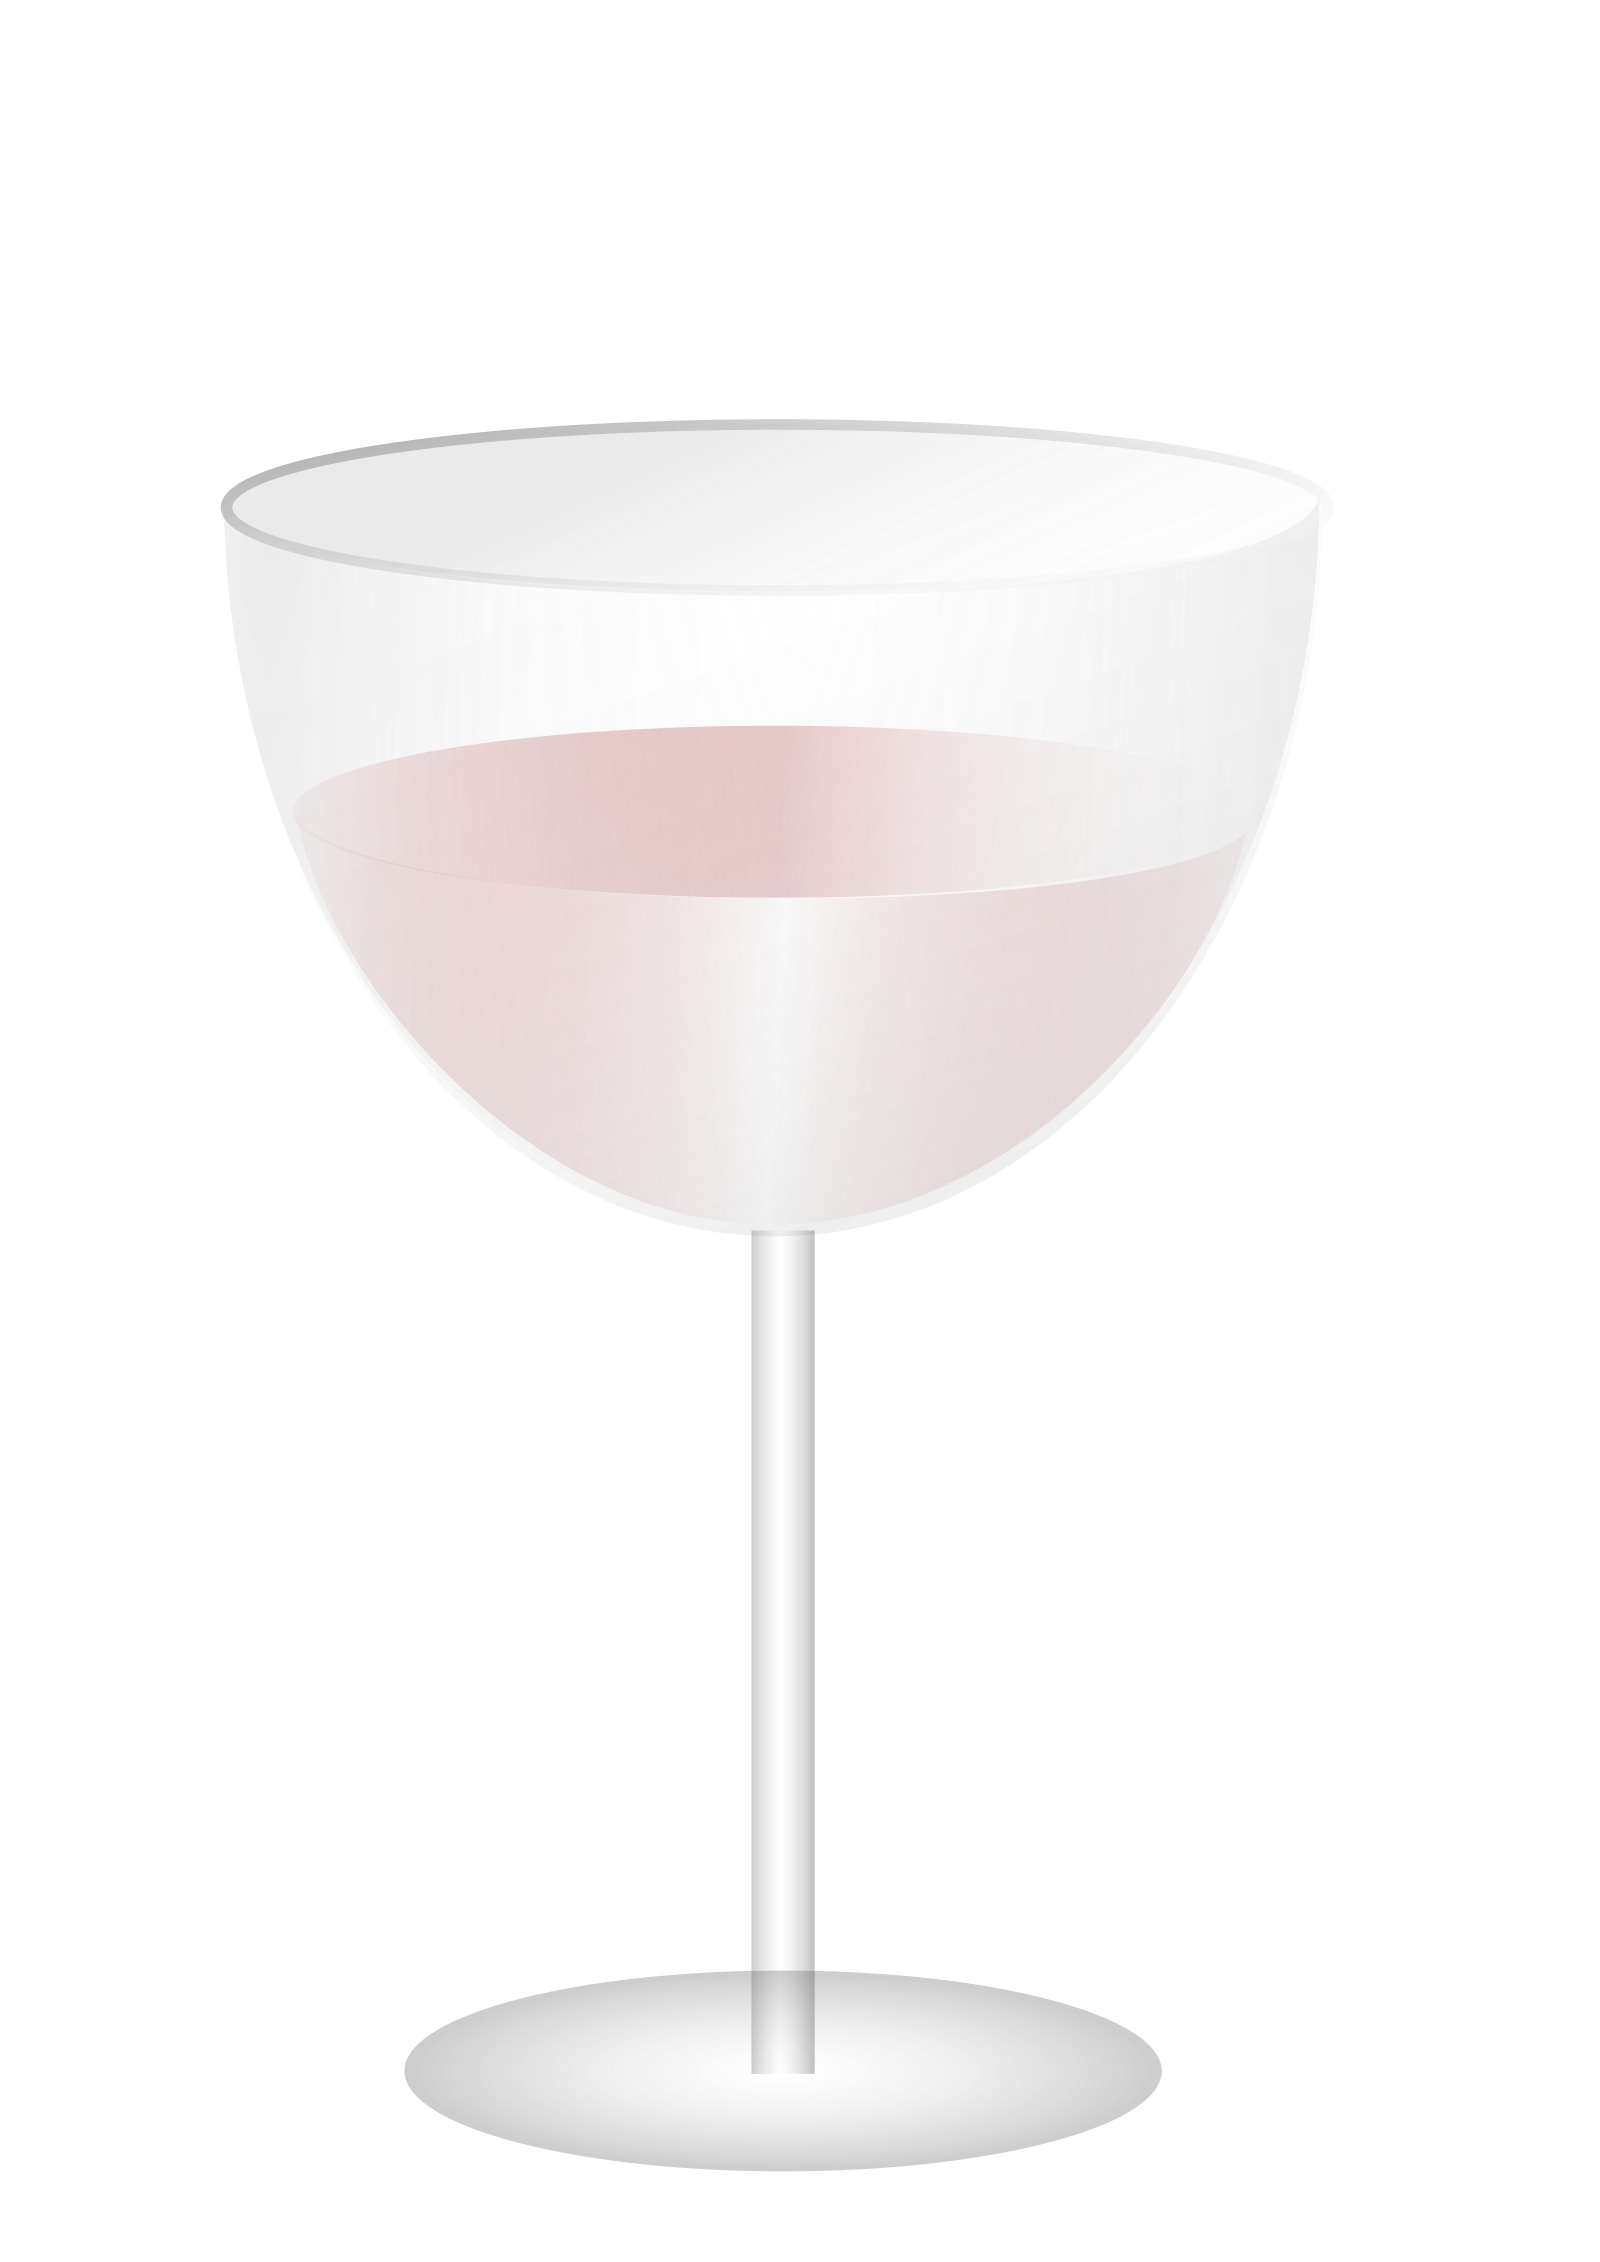 clipart party wine glass - photo #2